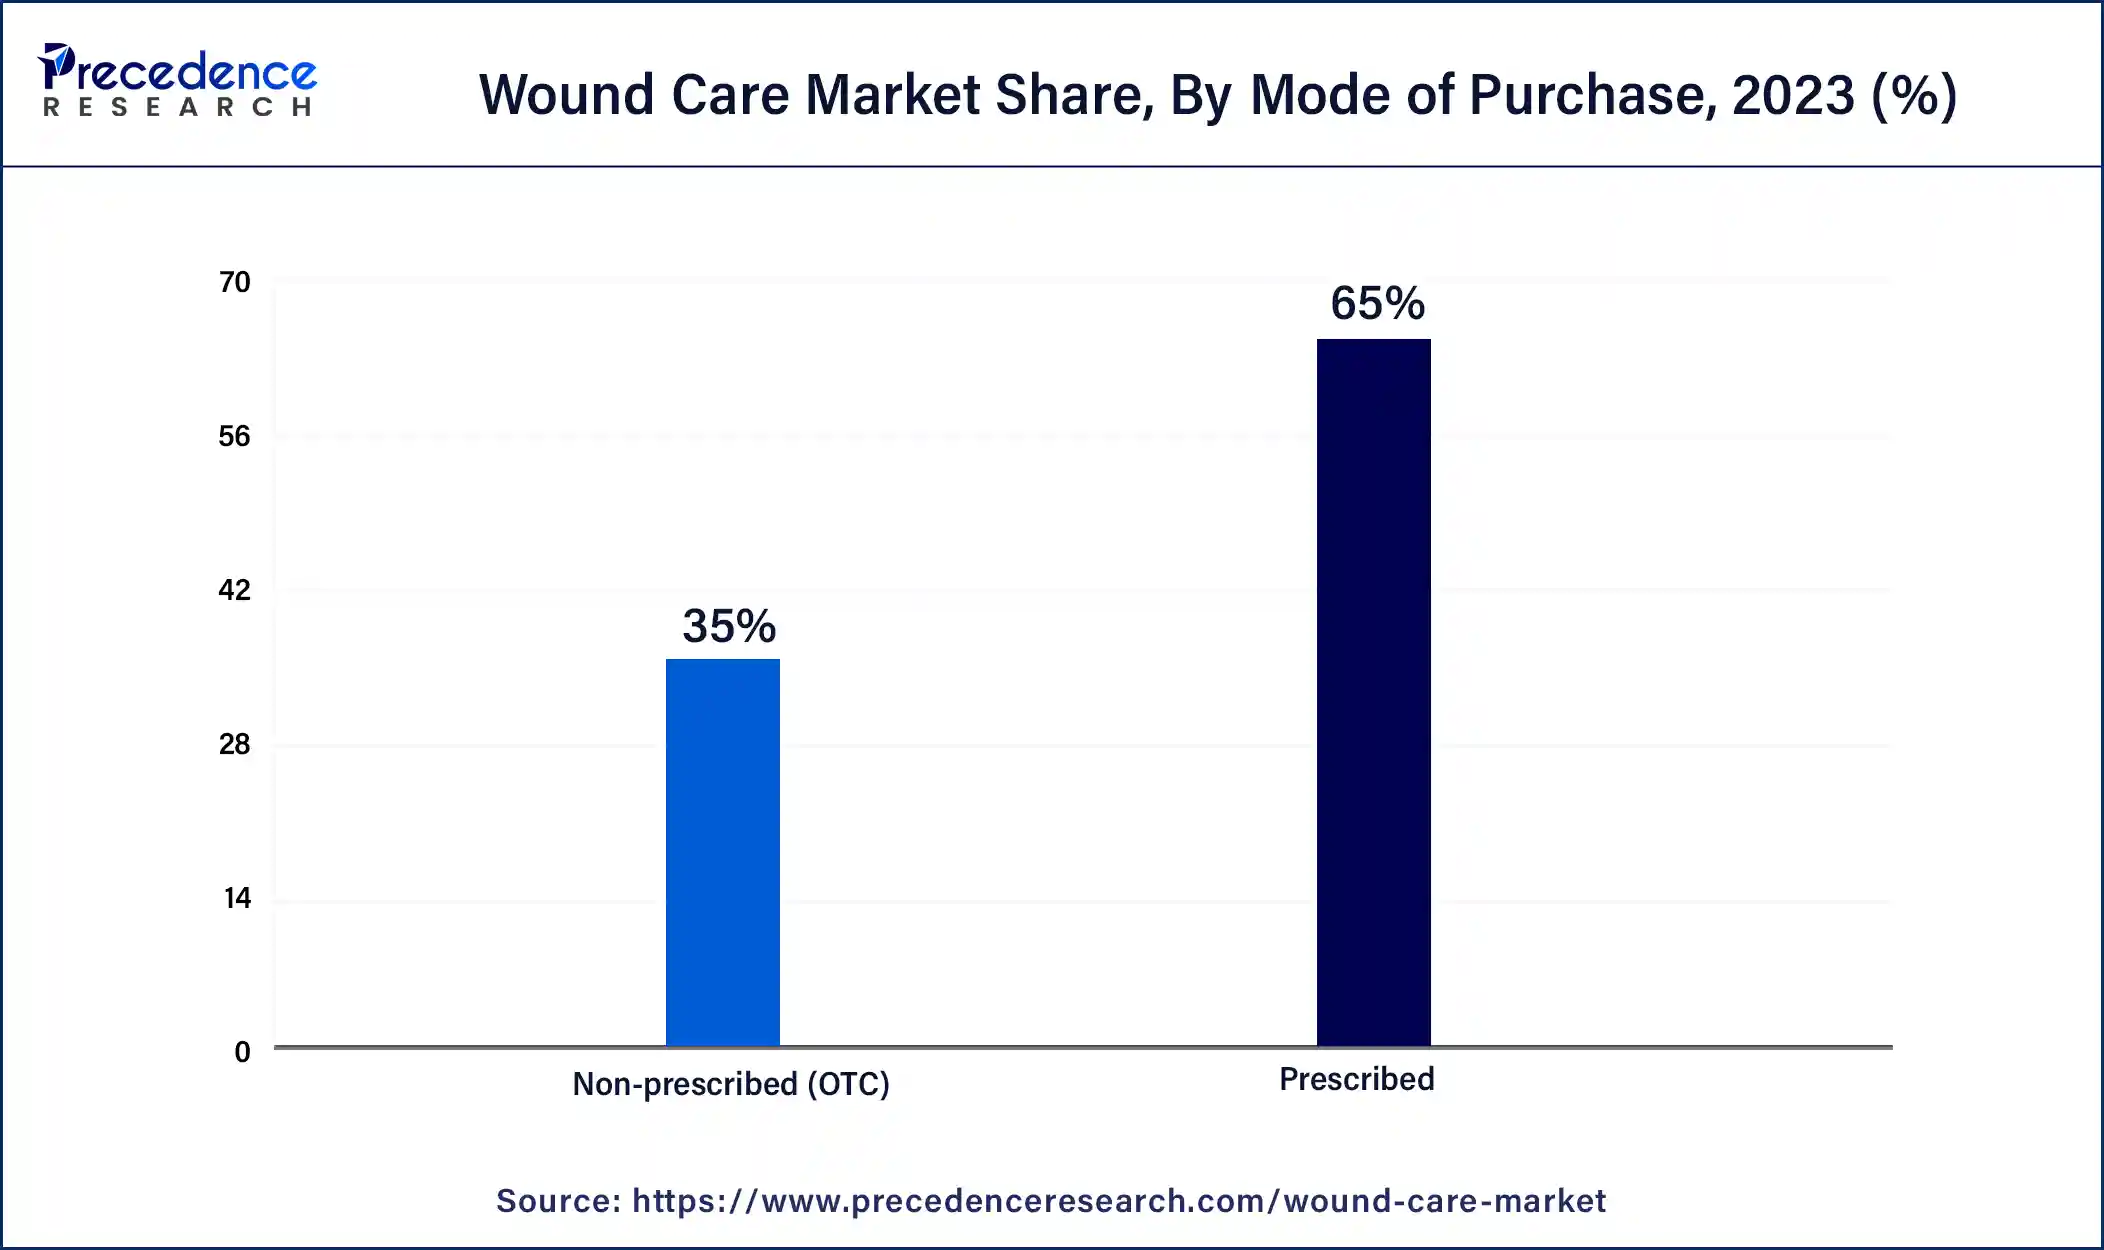 Wound Care Market Share, By Mode of Purchase, 2023 (%)